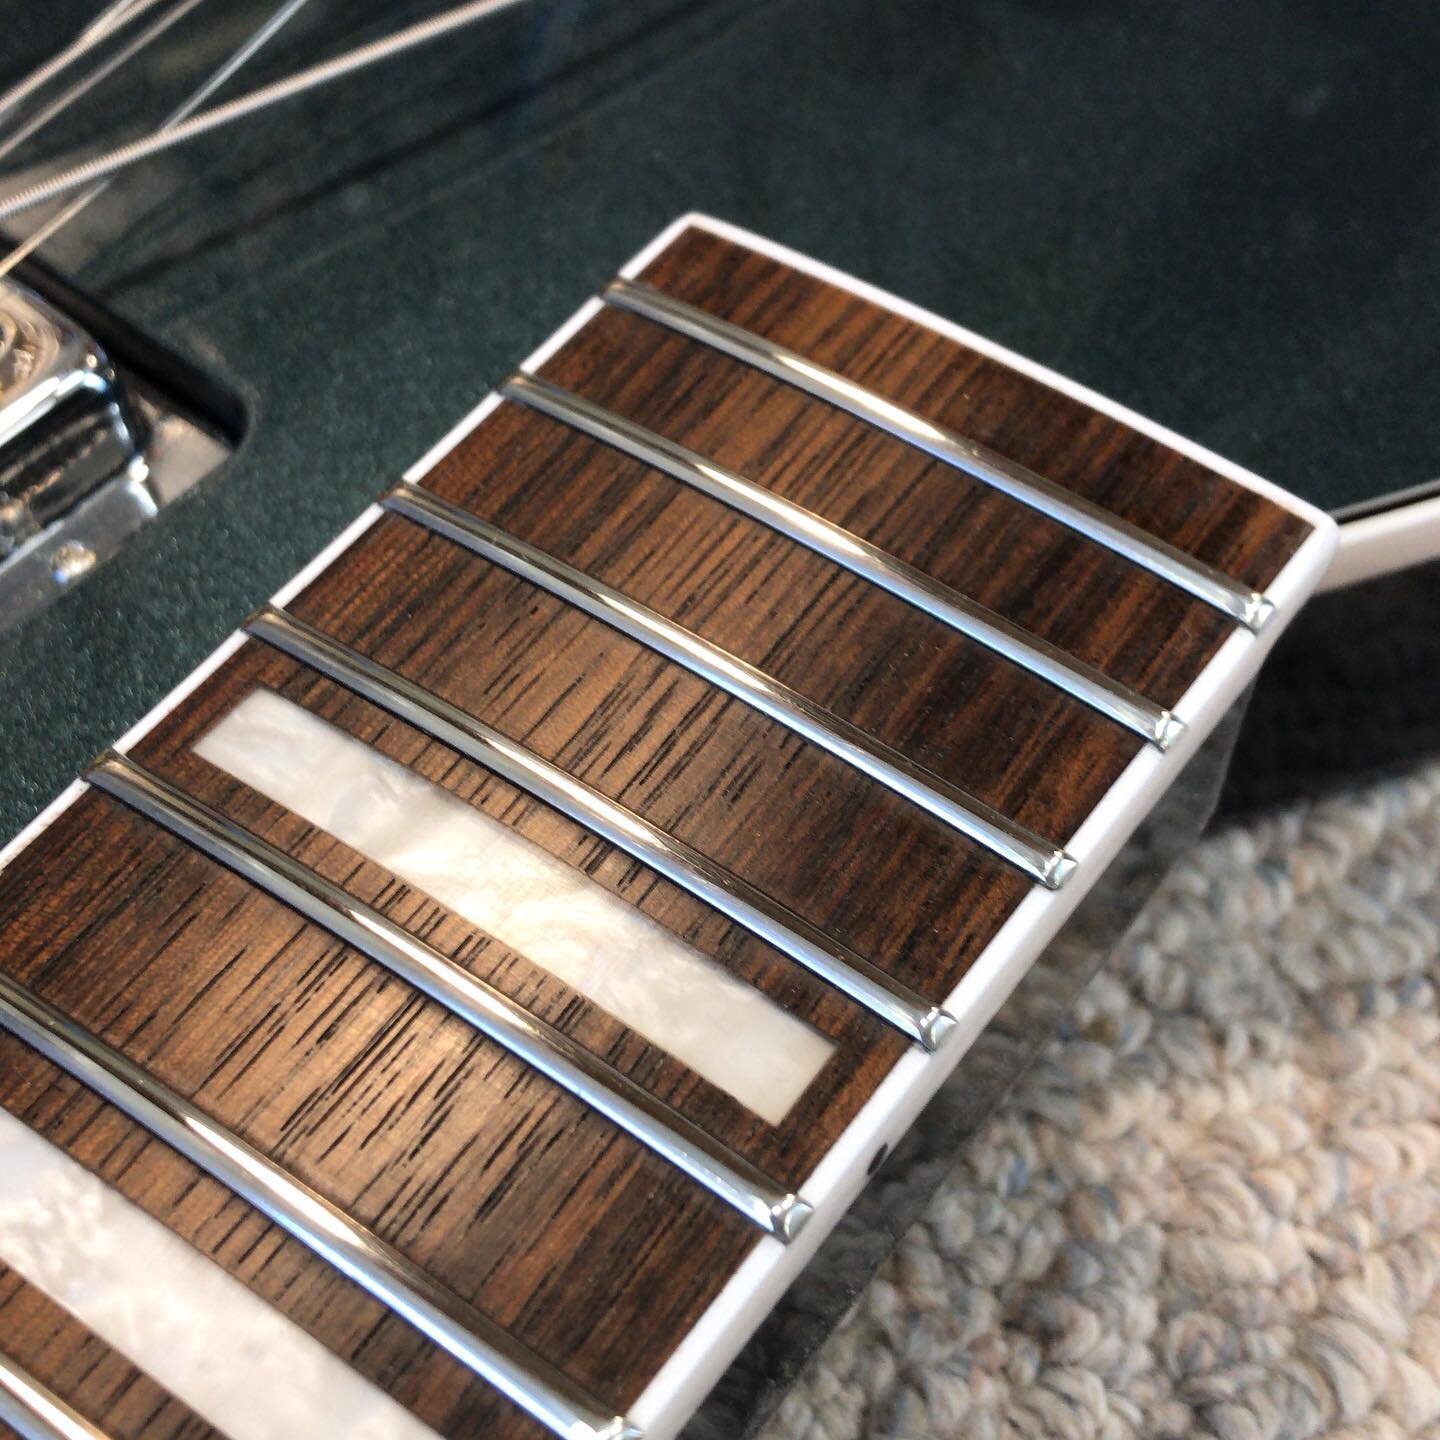 I think this fretboard and body finish look really nice together.

This is a brand new guitar that got a full fret level. It&rsquo;s not fun to tell someone that their new guitar needs extra work but the reality is it is quite common. These frets wer